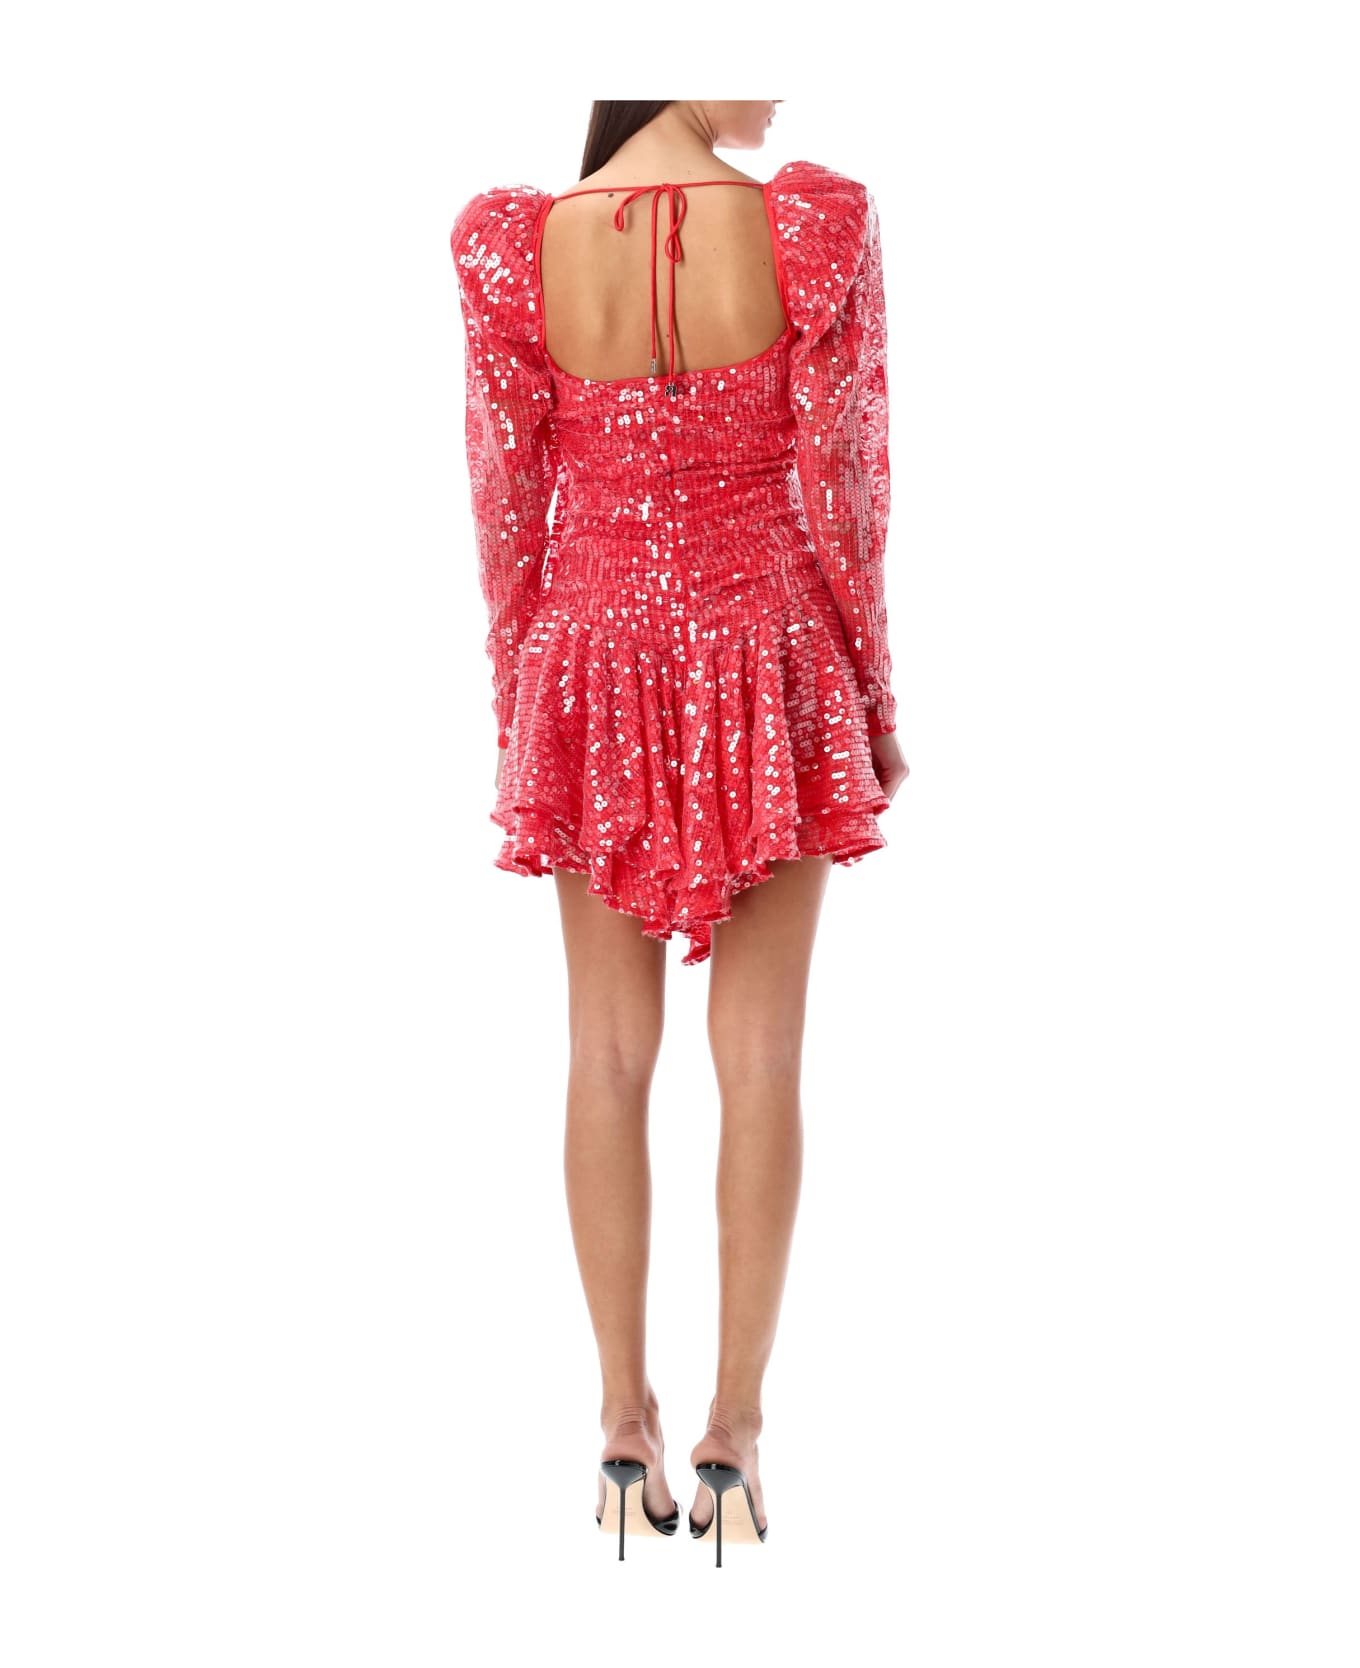 Rotate by Birger Christensen Mini Dress Lace Sequin - POPPY RED ワンピース＆ドレス